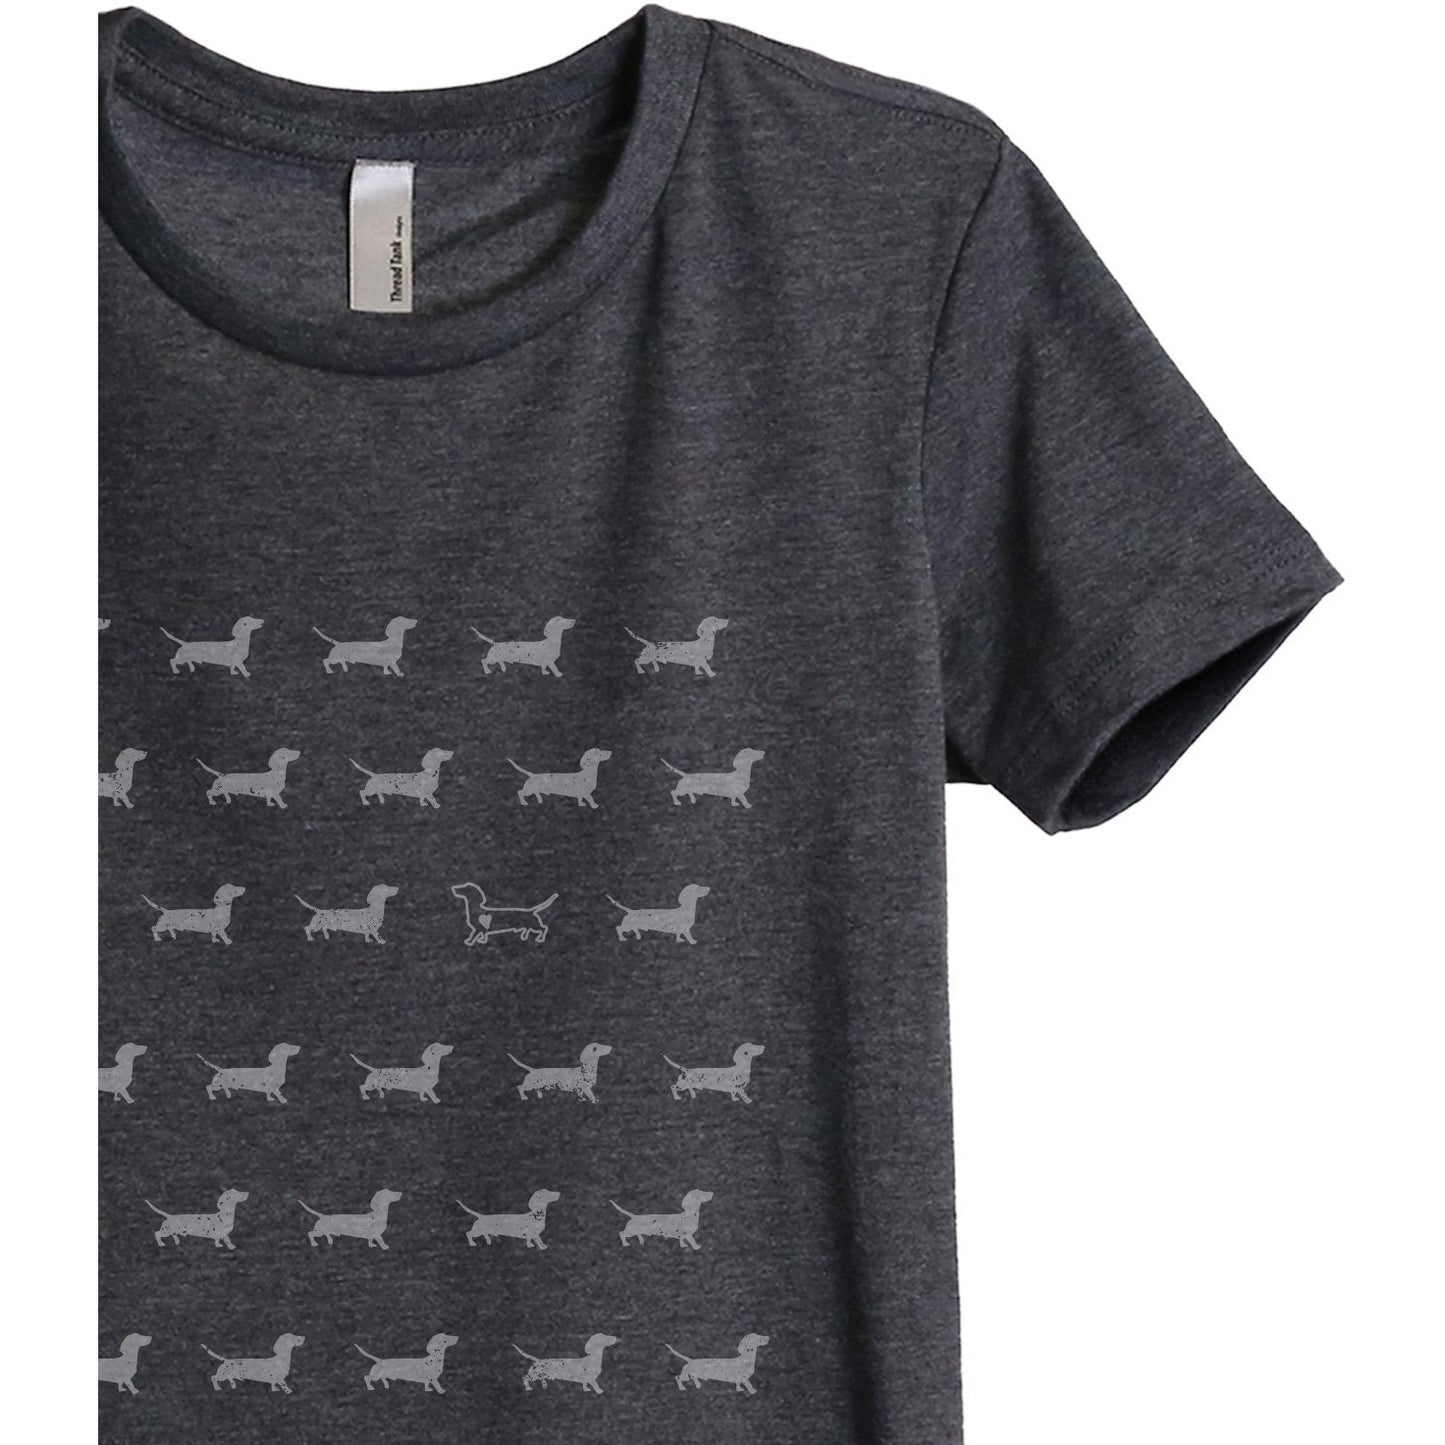 Dachshund Stand Out Women's Relaxed Crewneck T-Shirt Top Tee Charcoal Grey Zoom Details